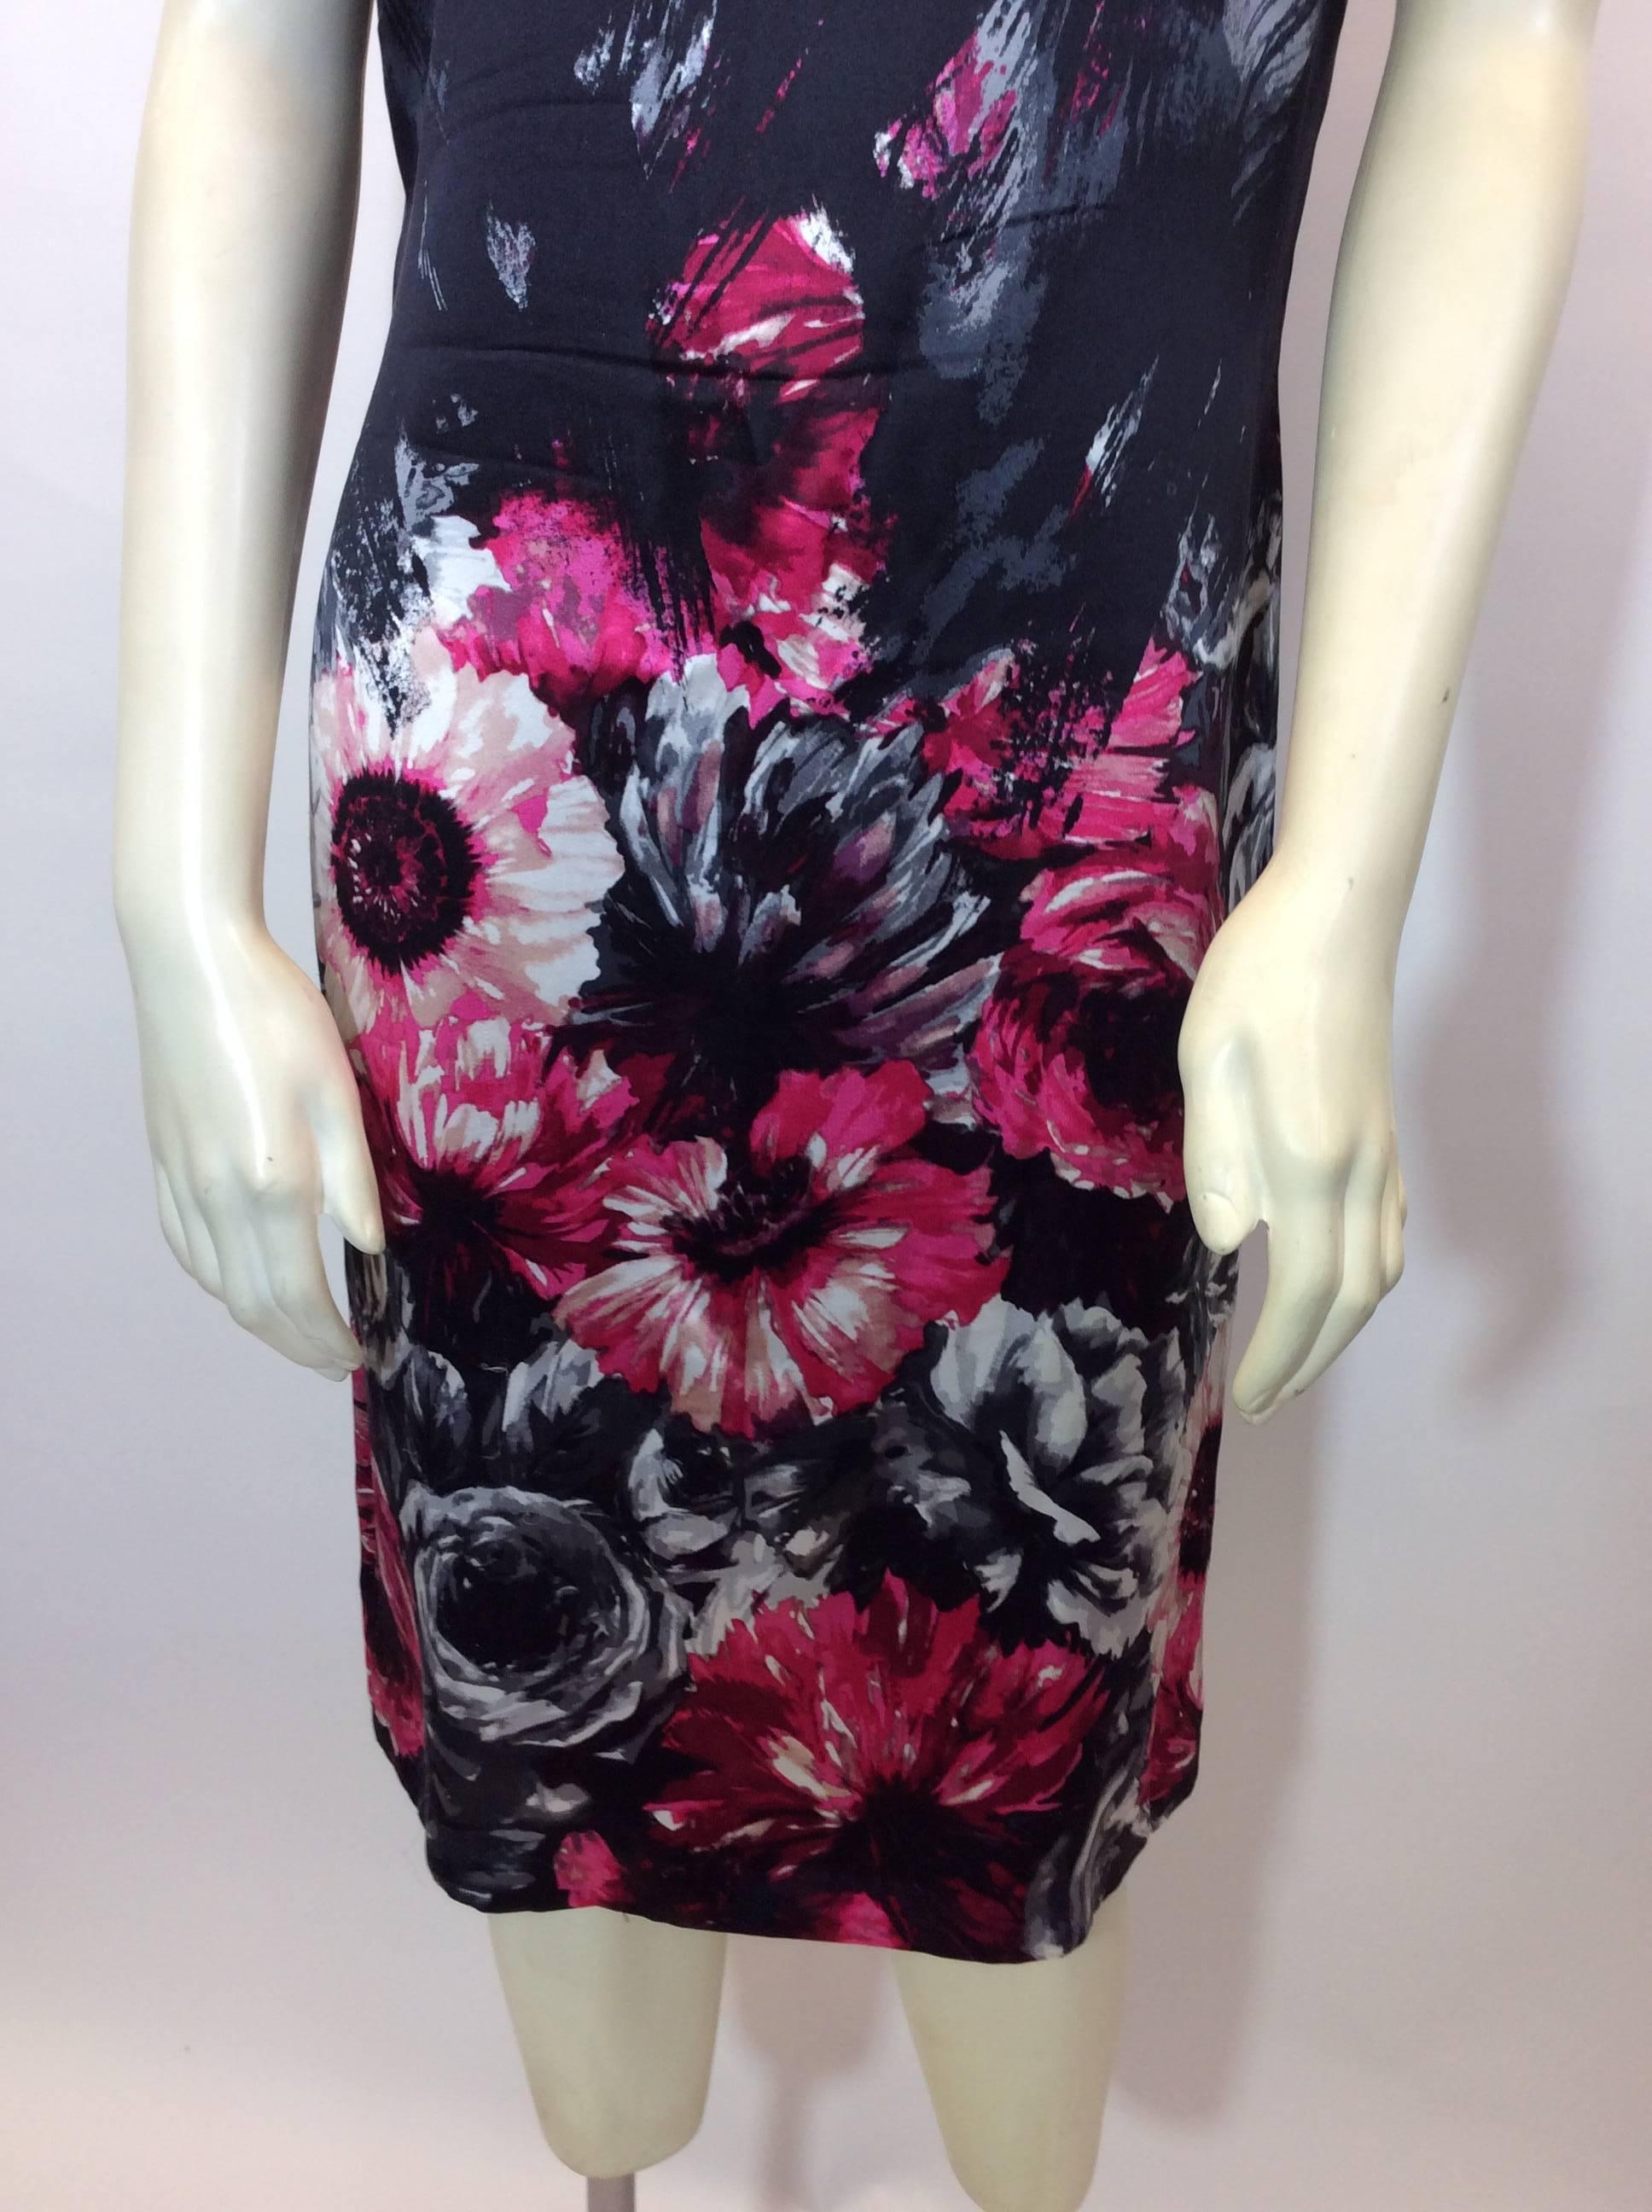 St. John Floral Printed Silk Dress
100% silk
Floral printed
Size 8
$399
Made in China